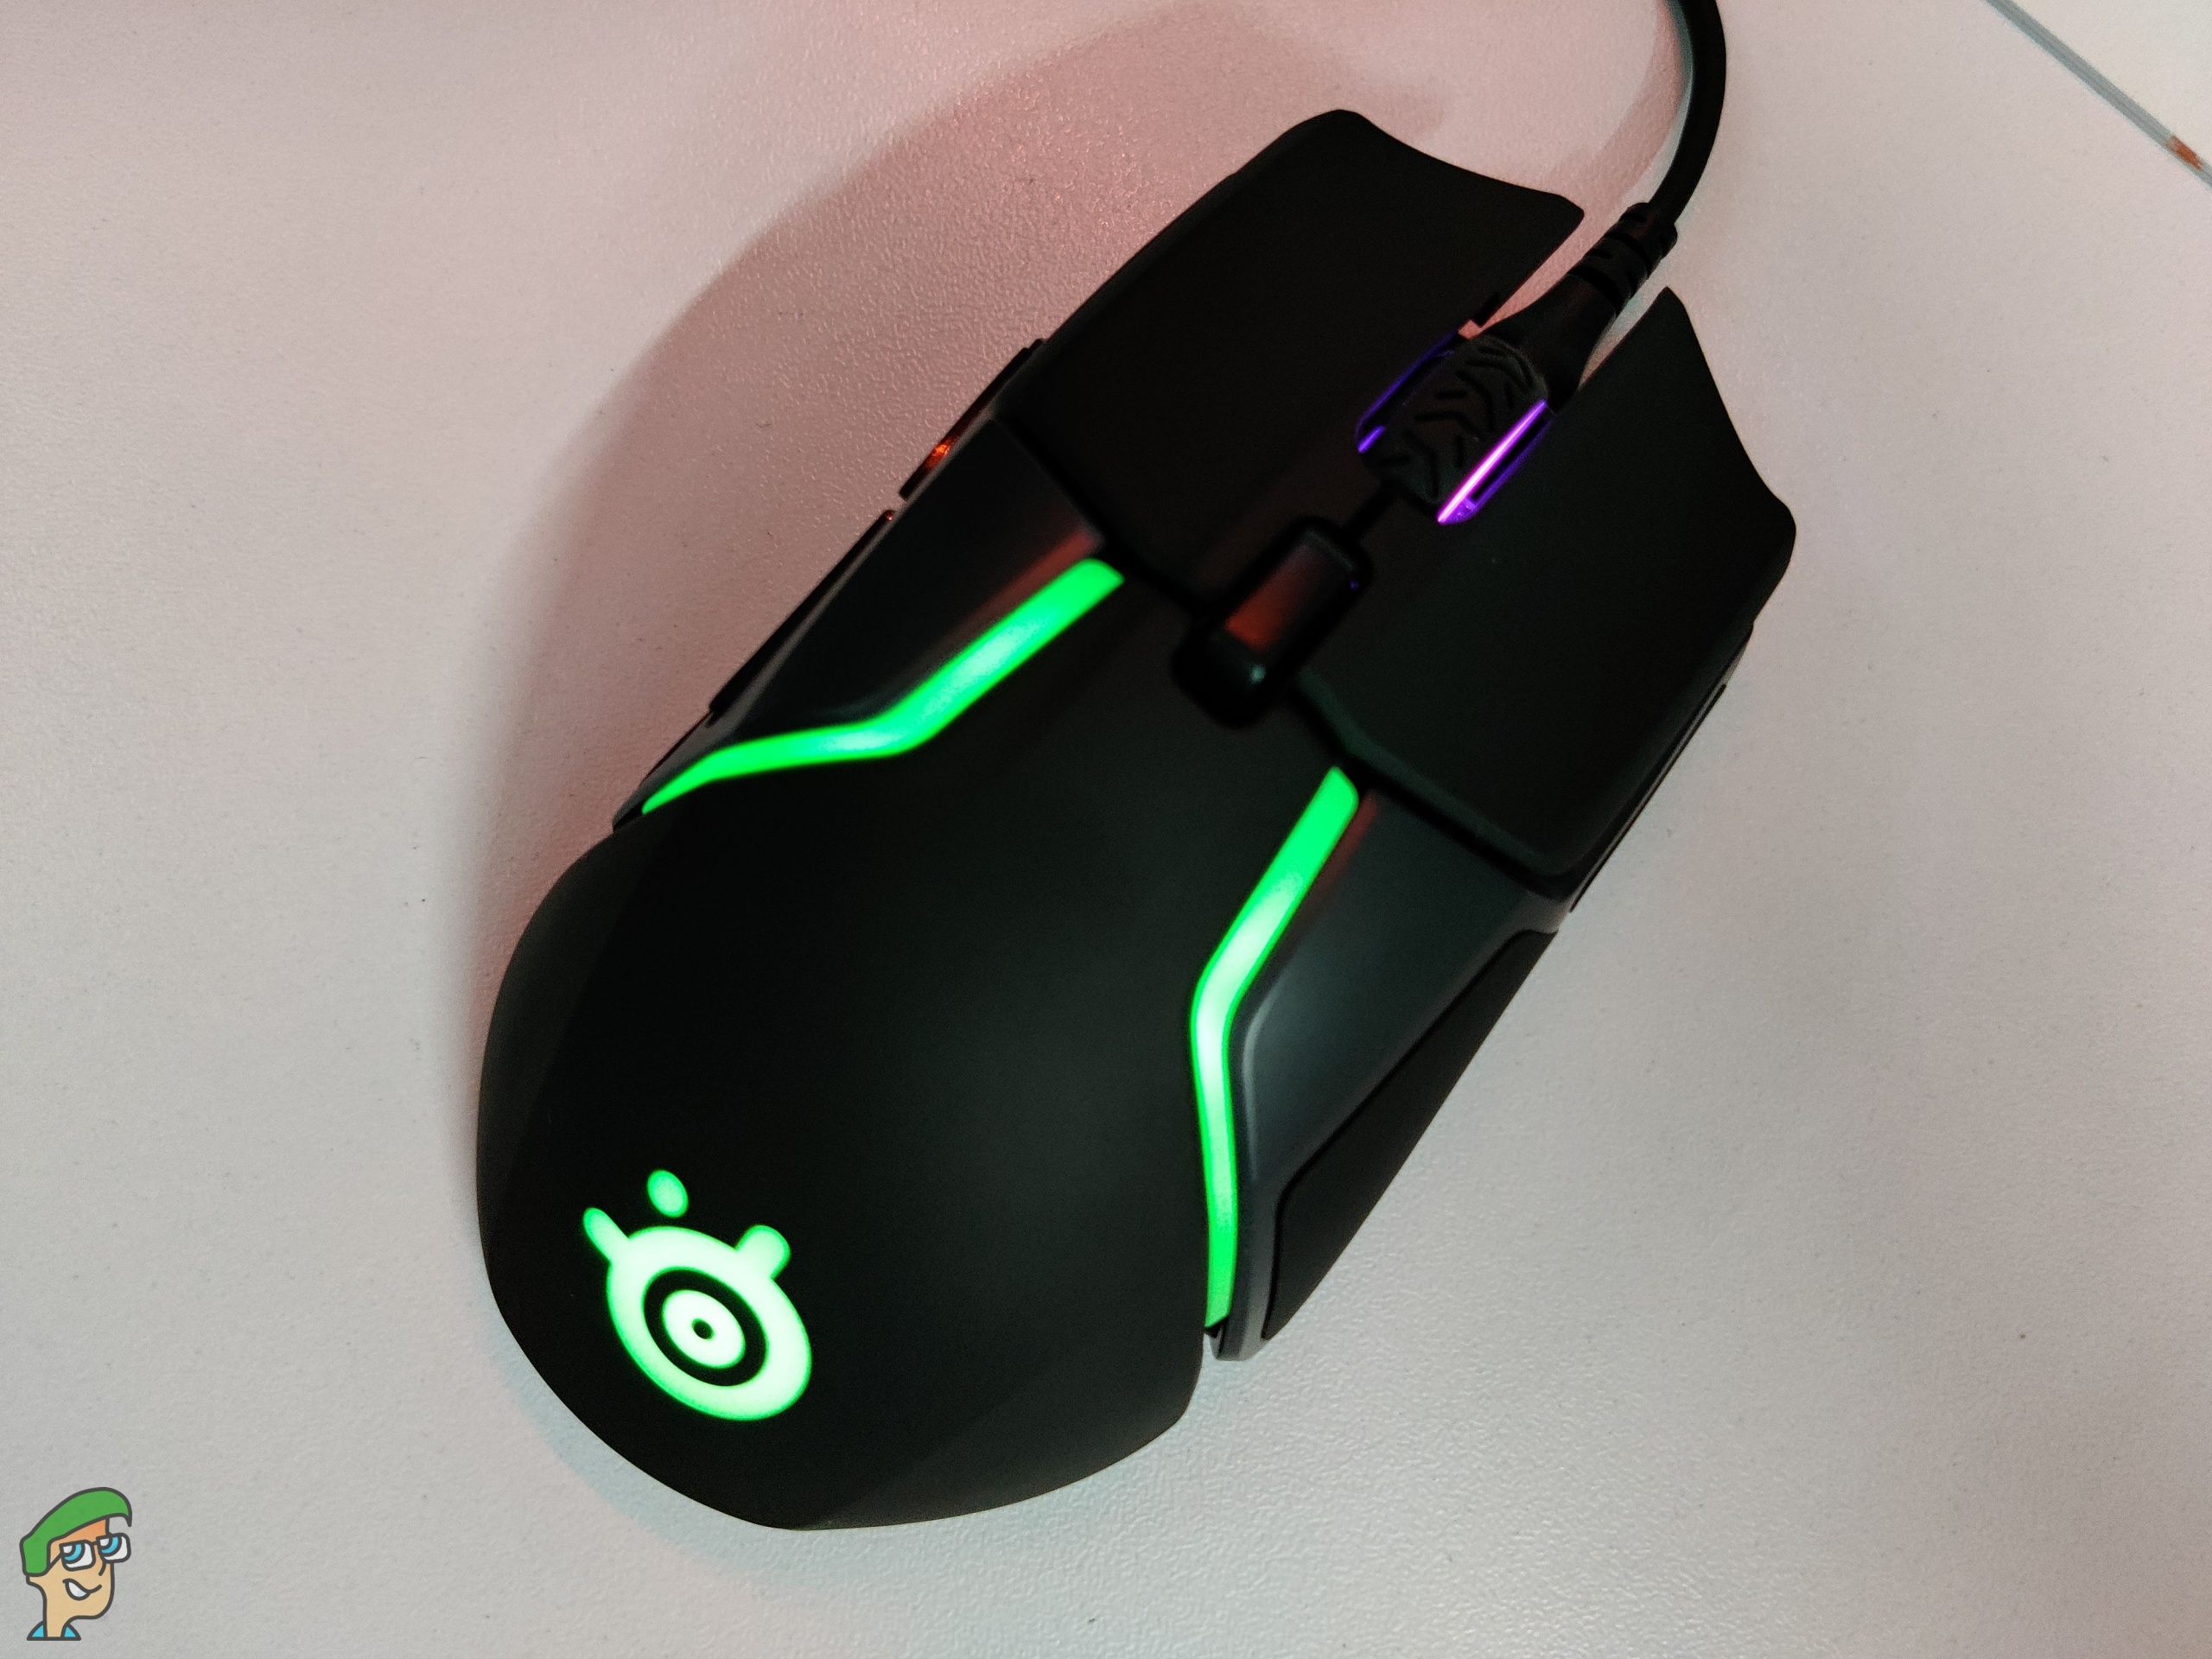 SteelSeries Rival 600 Gaming Mouse Review